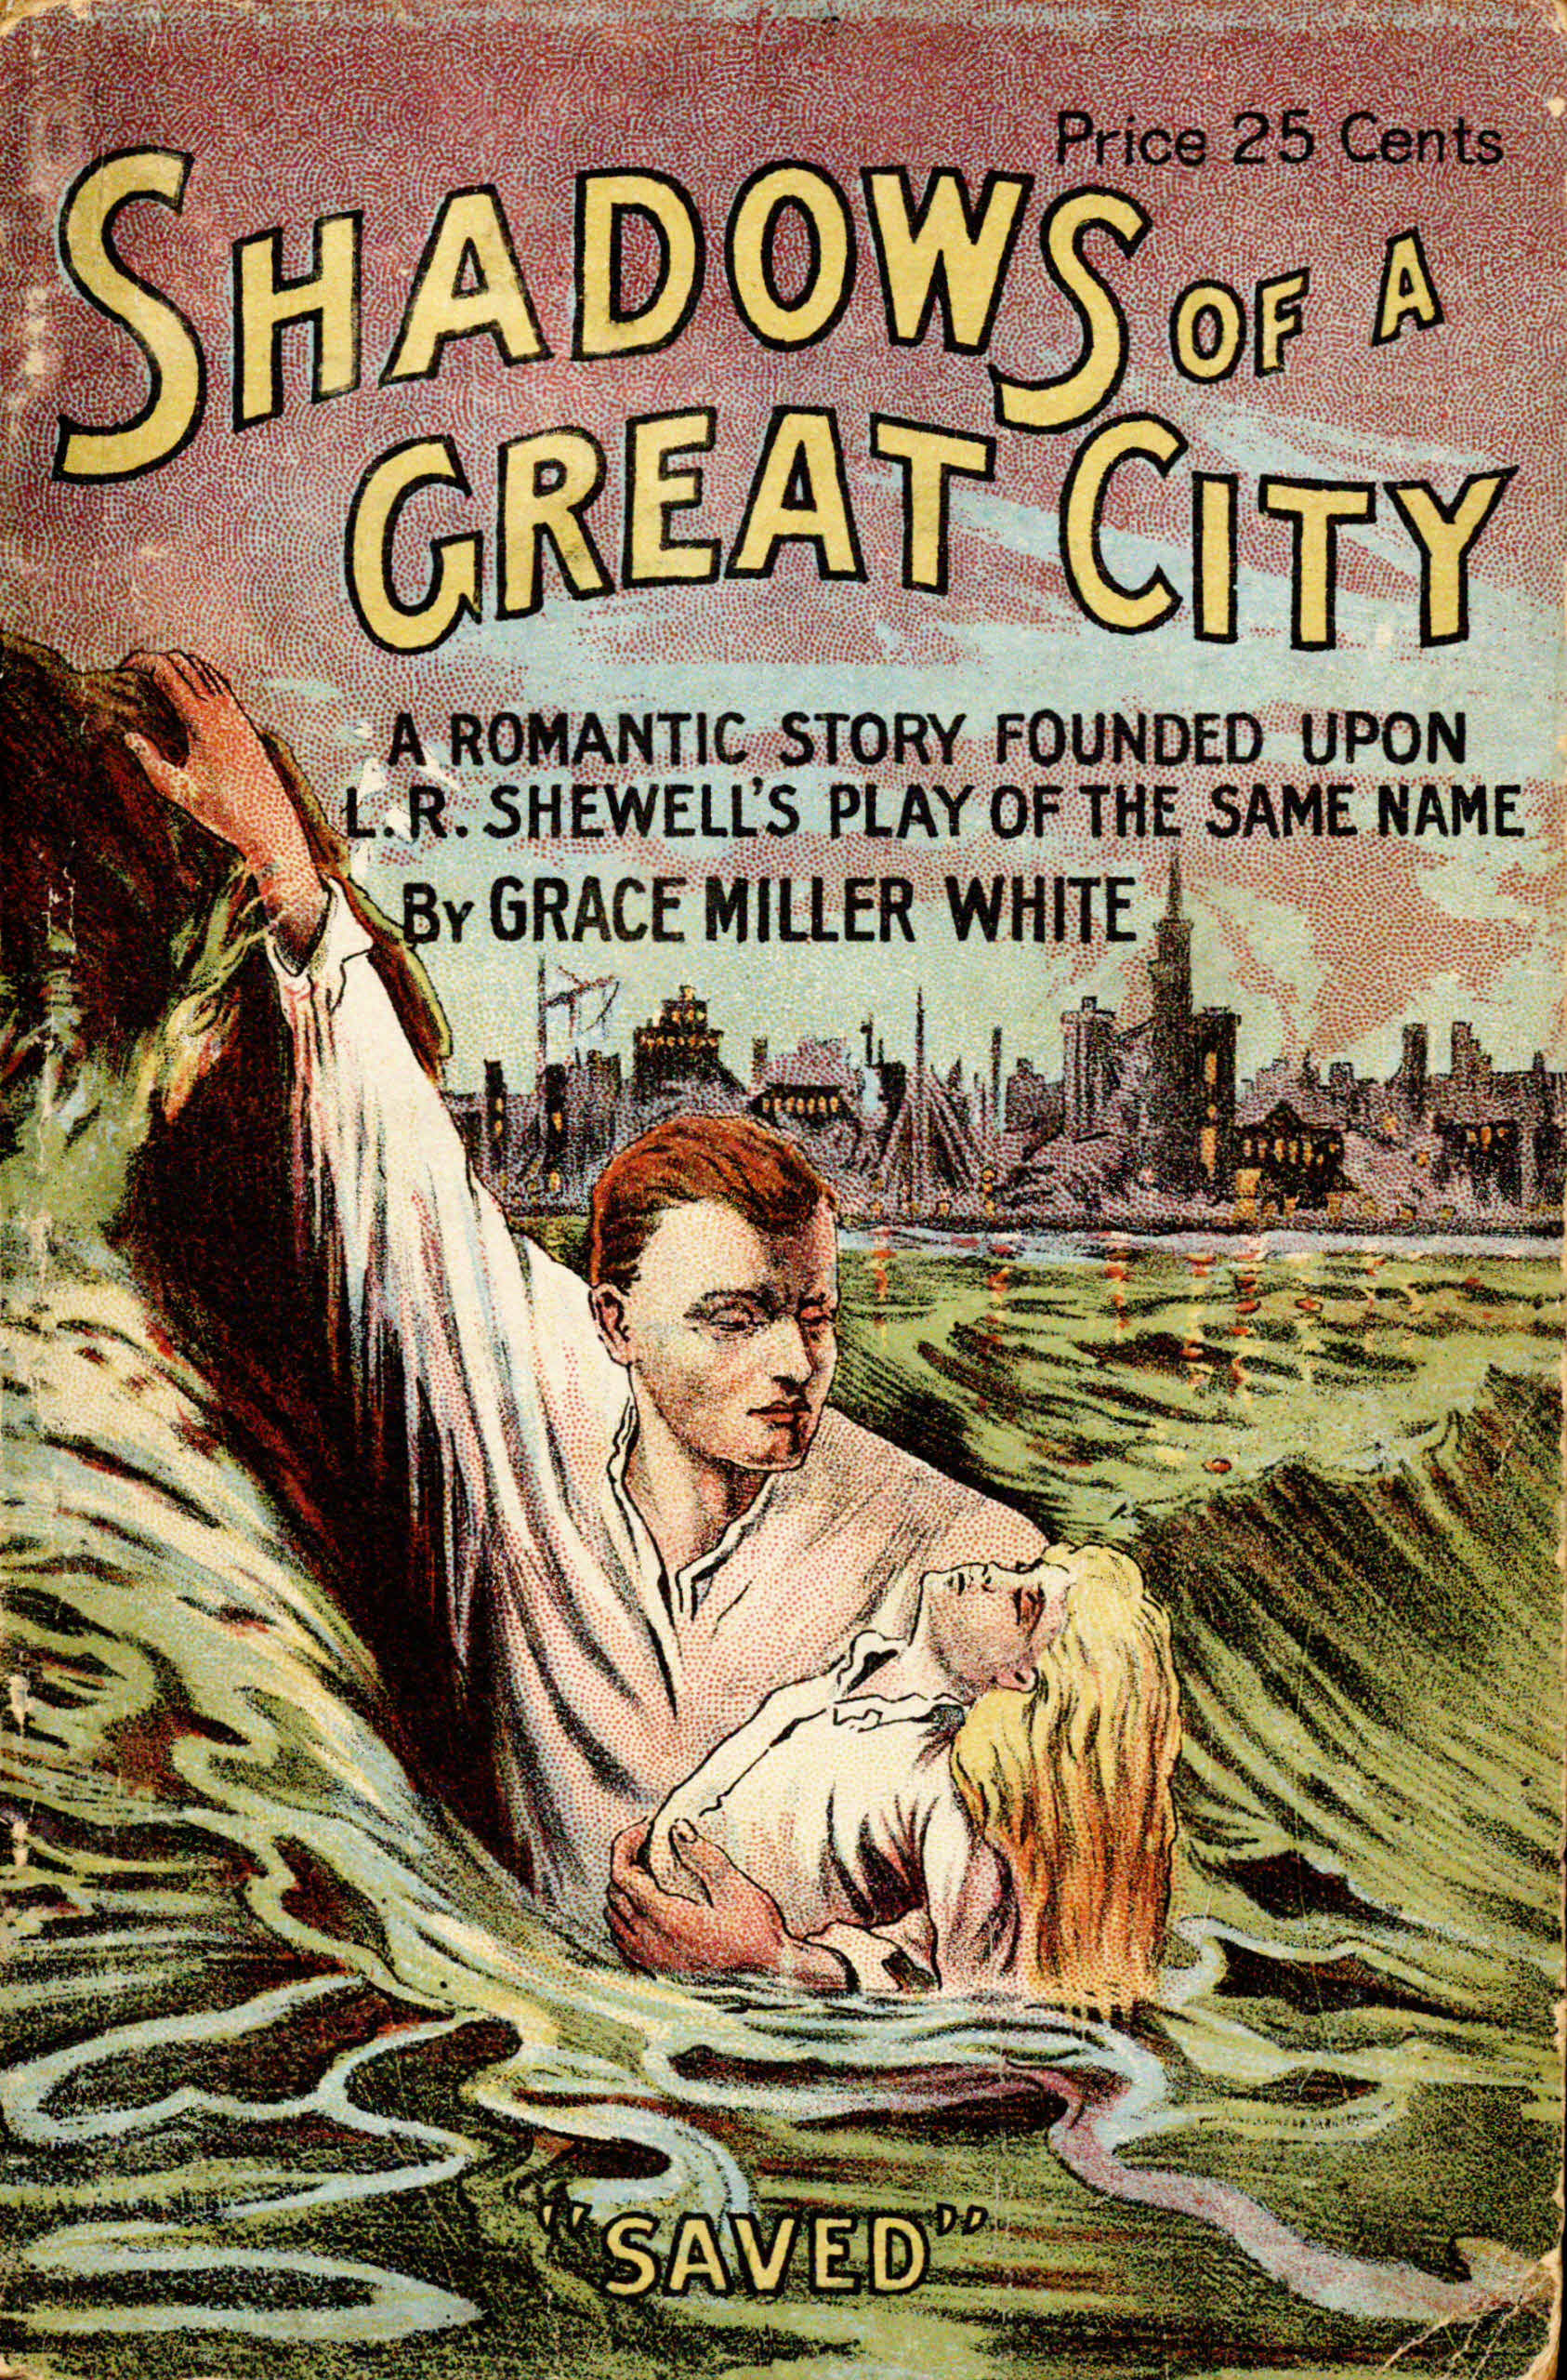 The shadows of a great city, by Grace Miller White—A Project